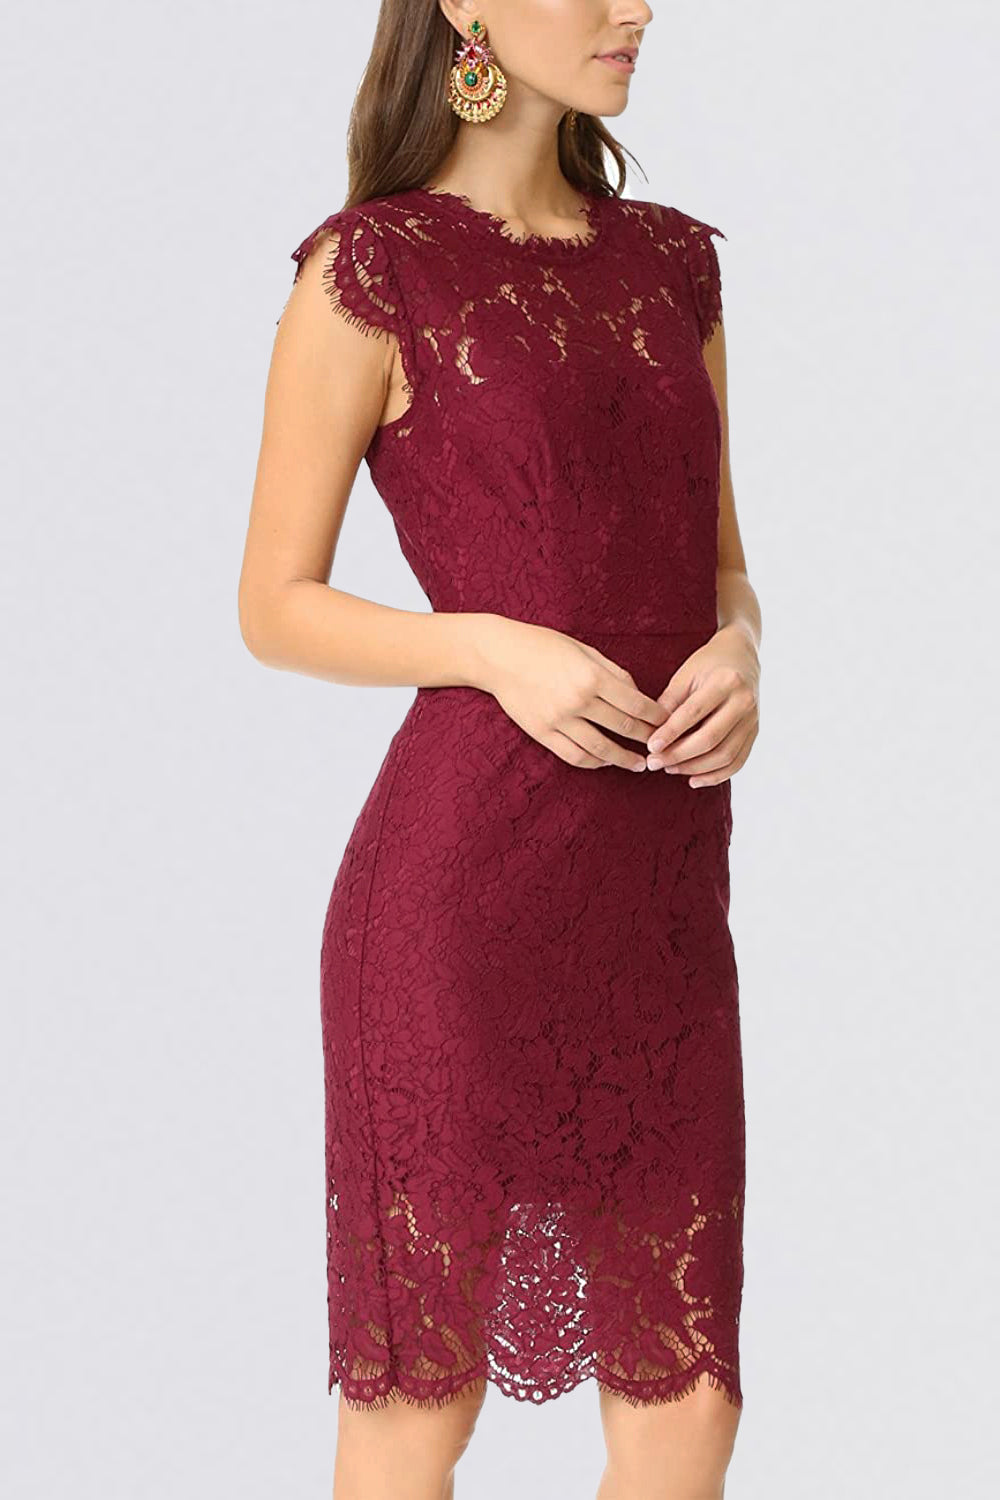 Mermaid Lace Illusion Sexy Homecoming Dresses